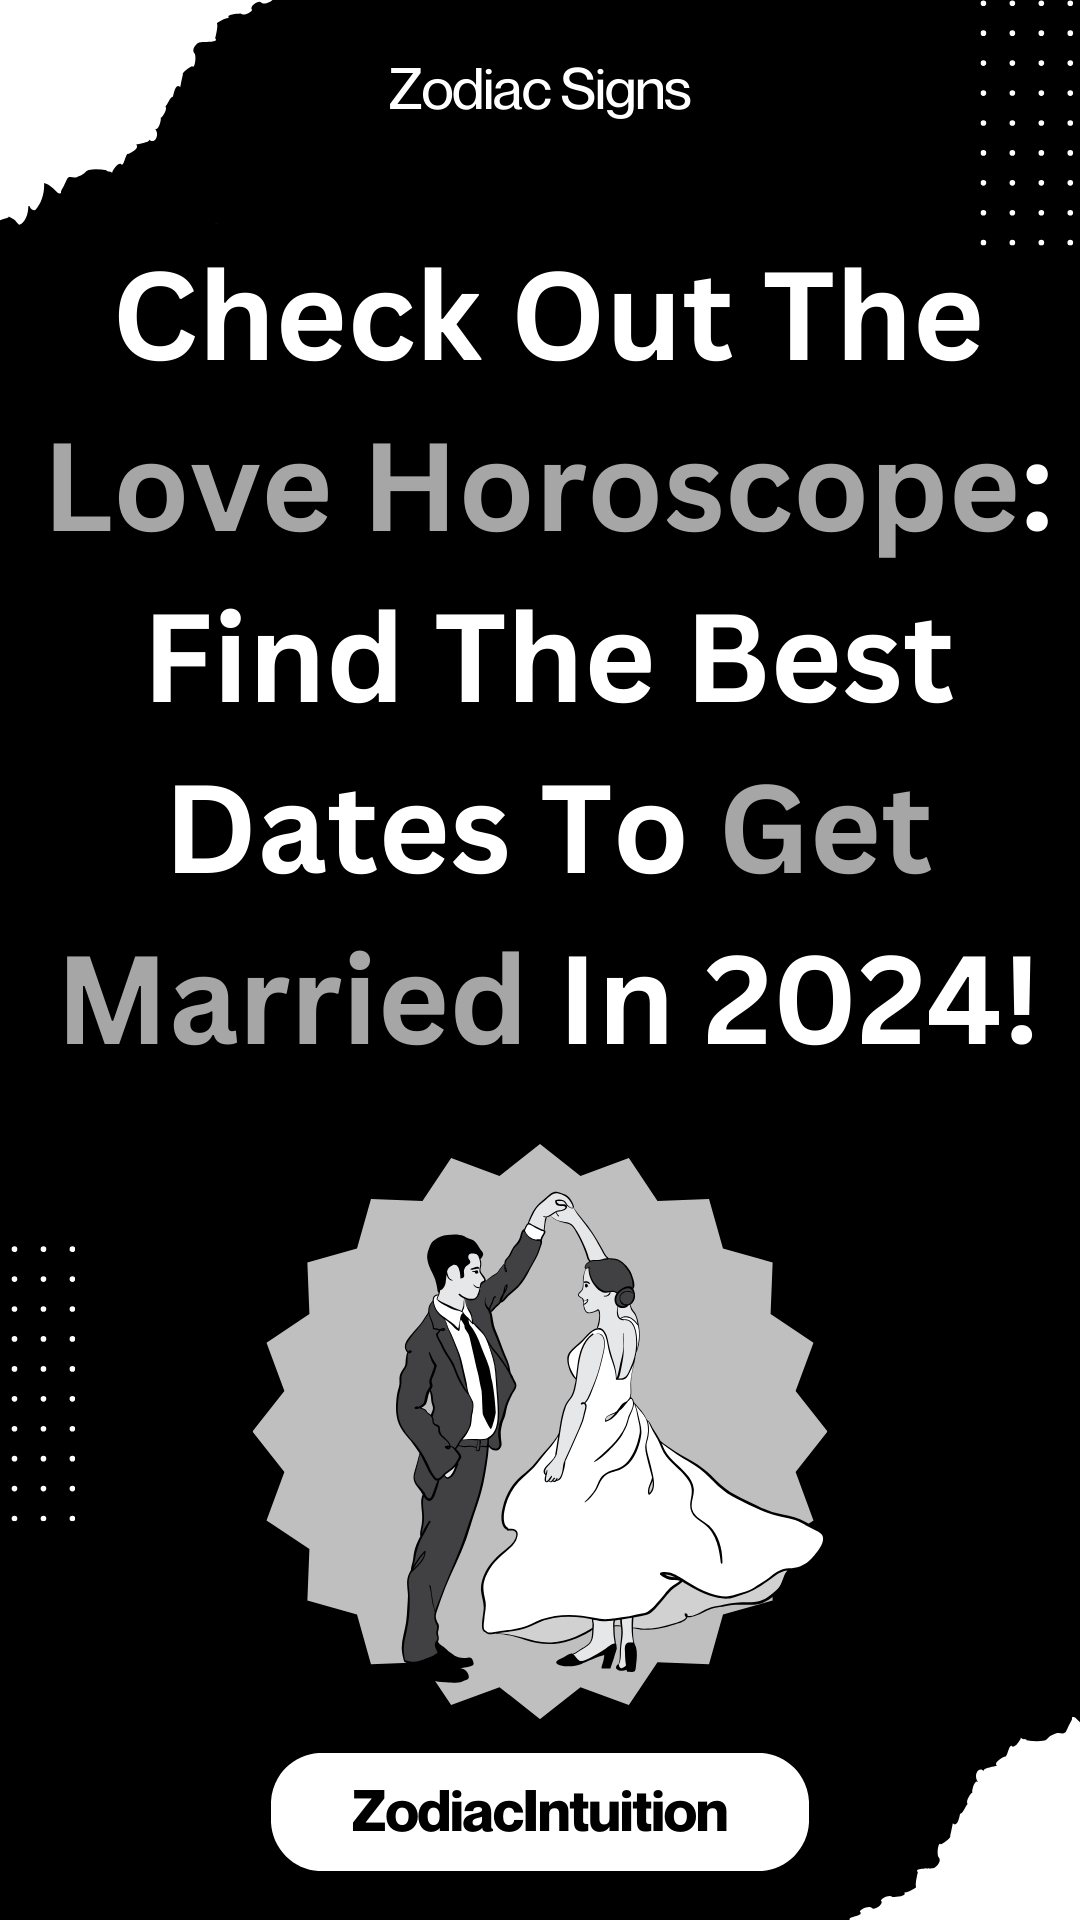 Check Out The Love Horoscope: Find The Best Dates To Get Married In 2024!